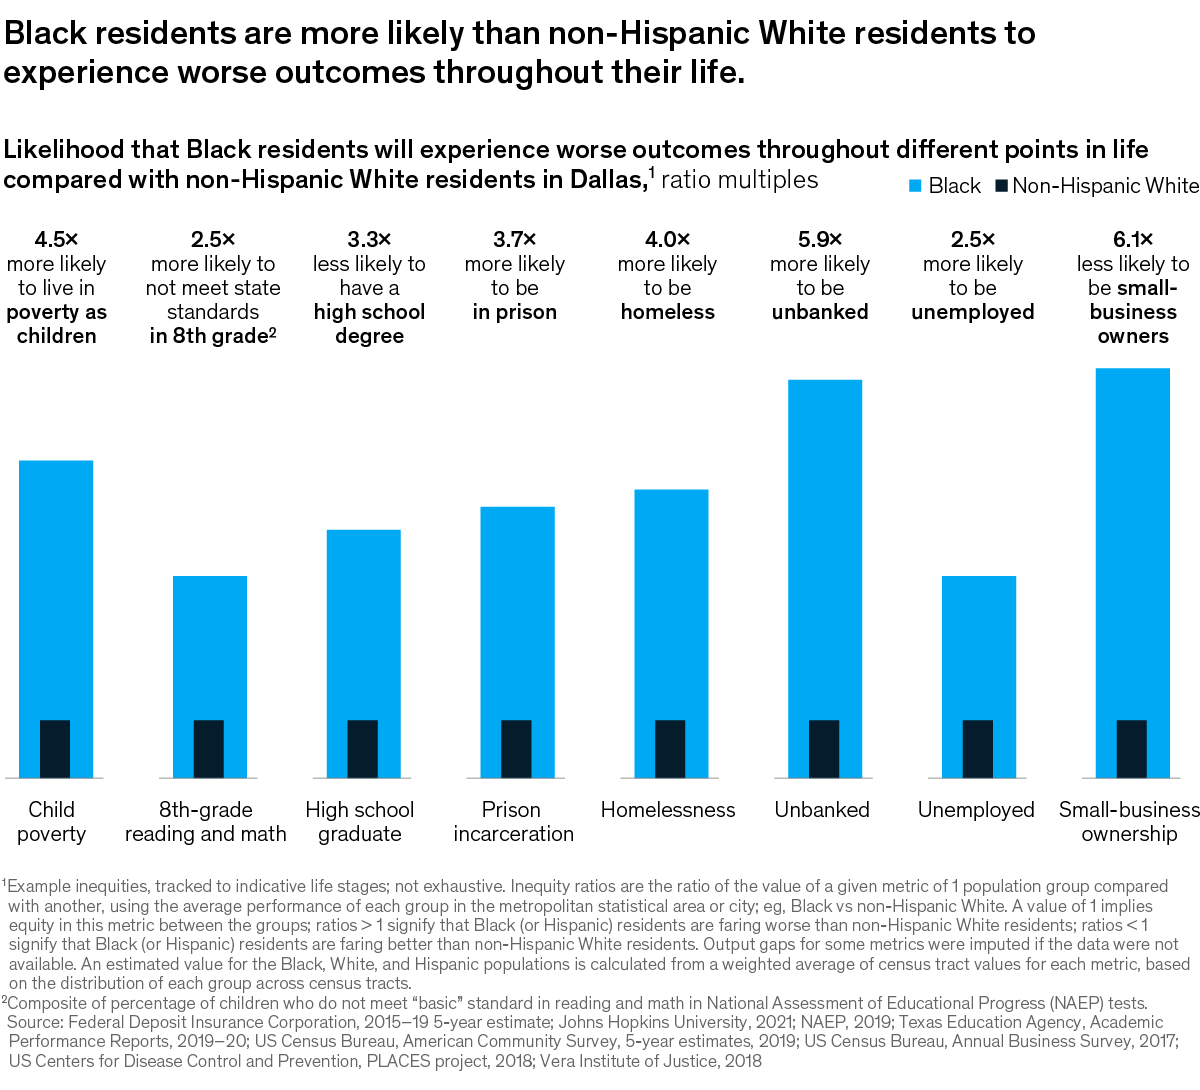 Chart likelihood that black residents will experience worse outcomes in life compared with white residents in Dallas